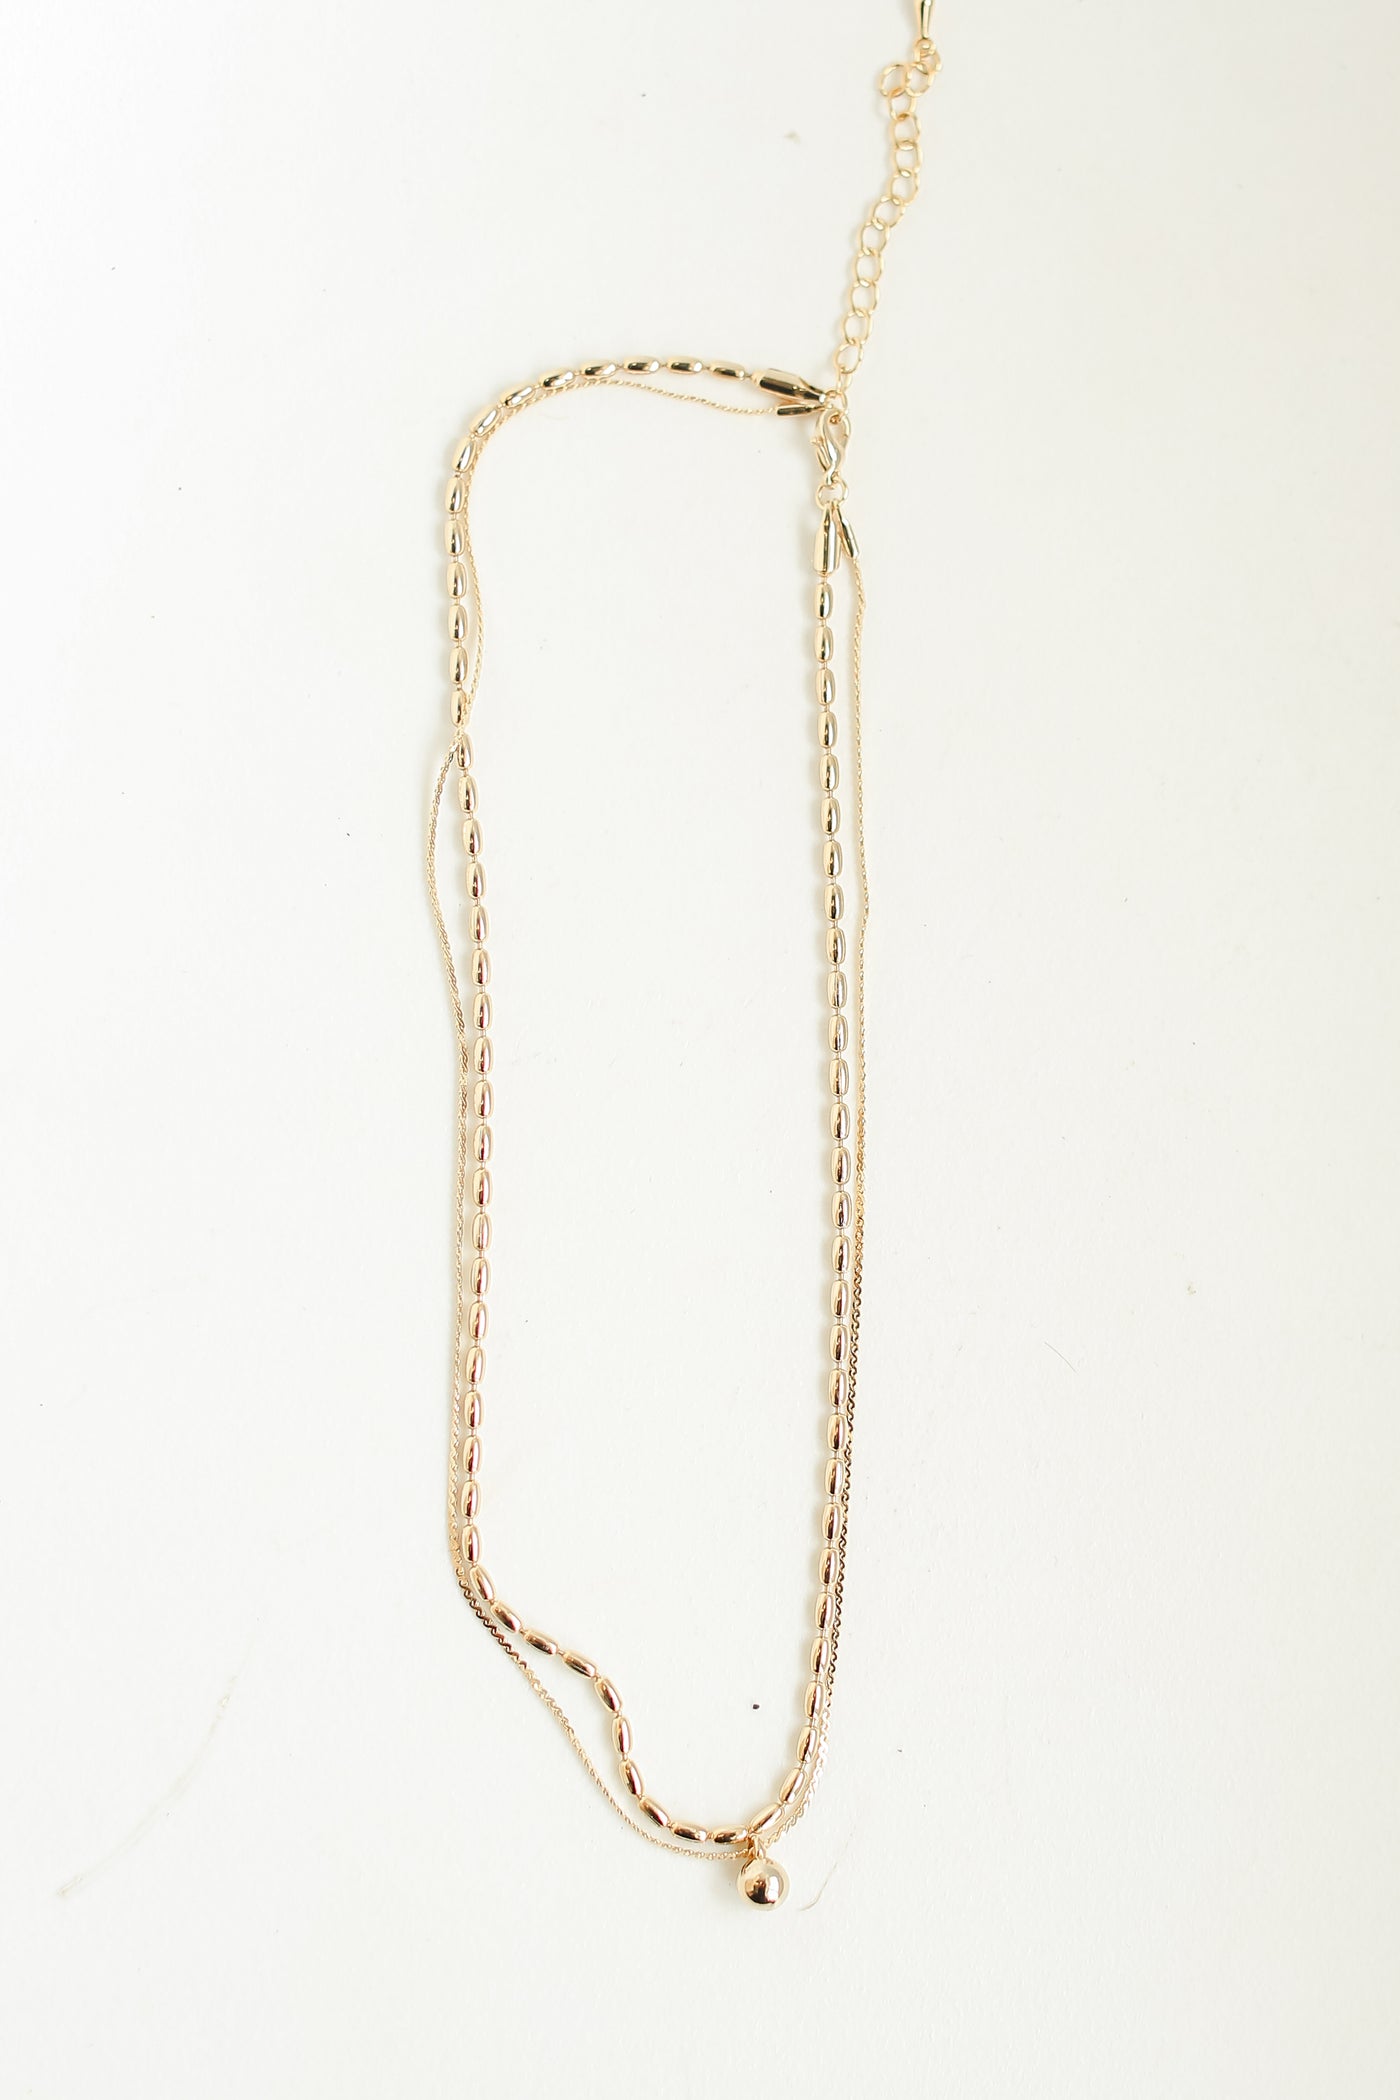 Gold Layered Chain Necklace flat lay